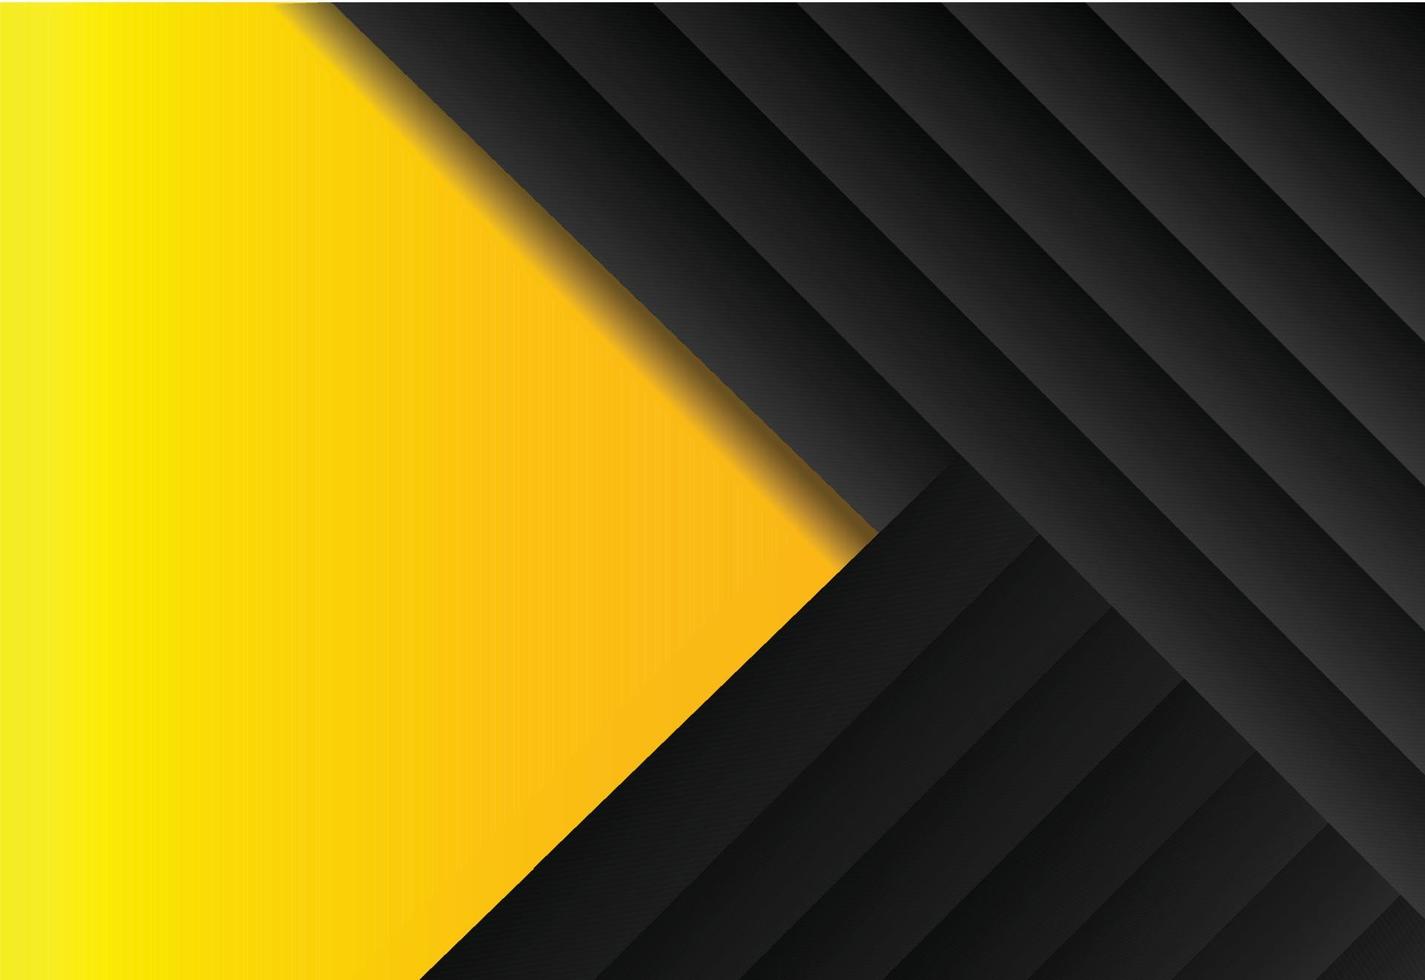 Black and yellow abstrack creative background vector